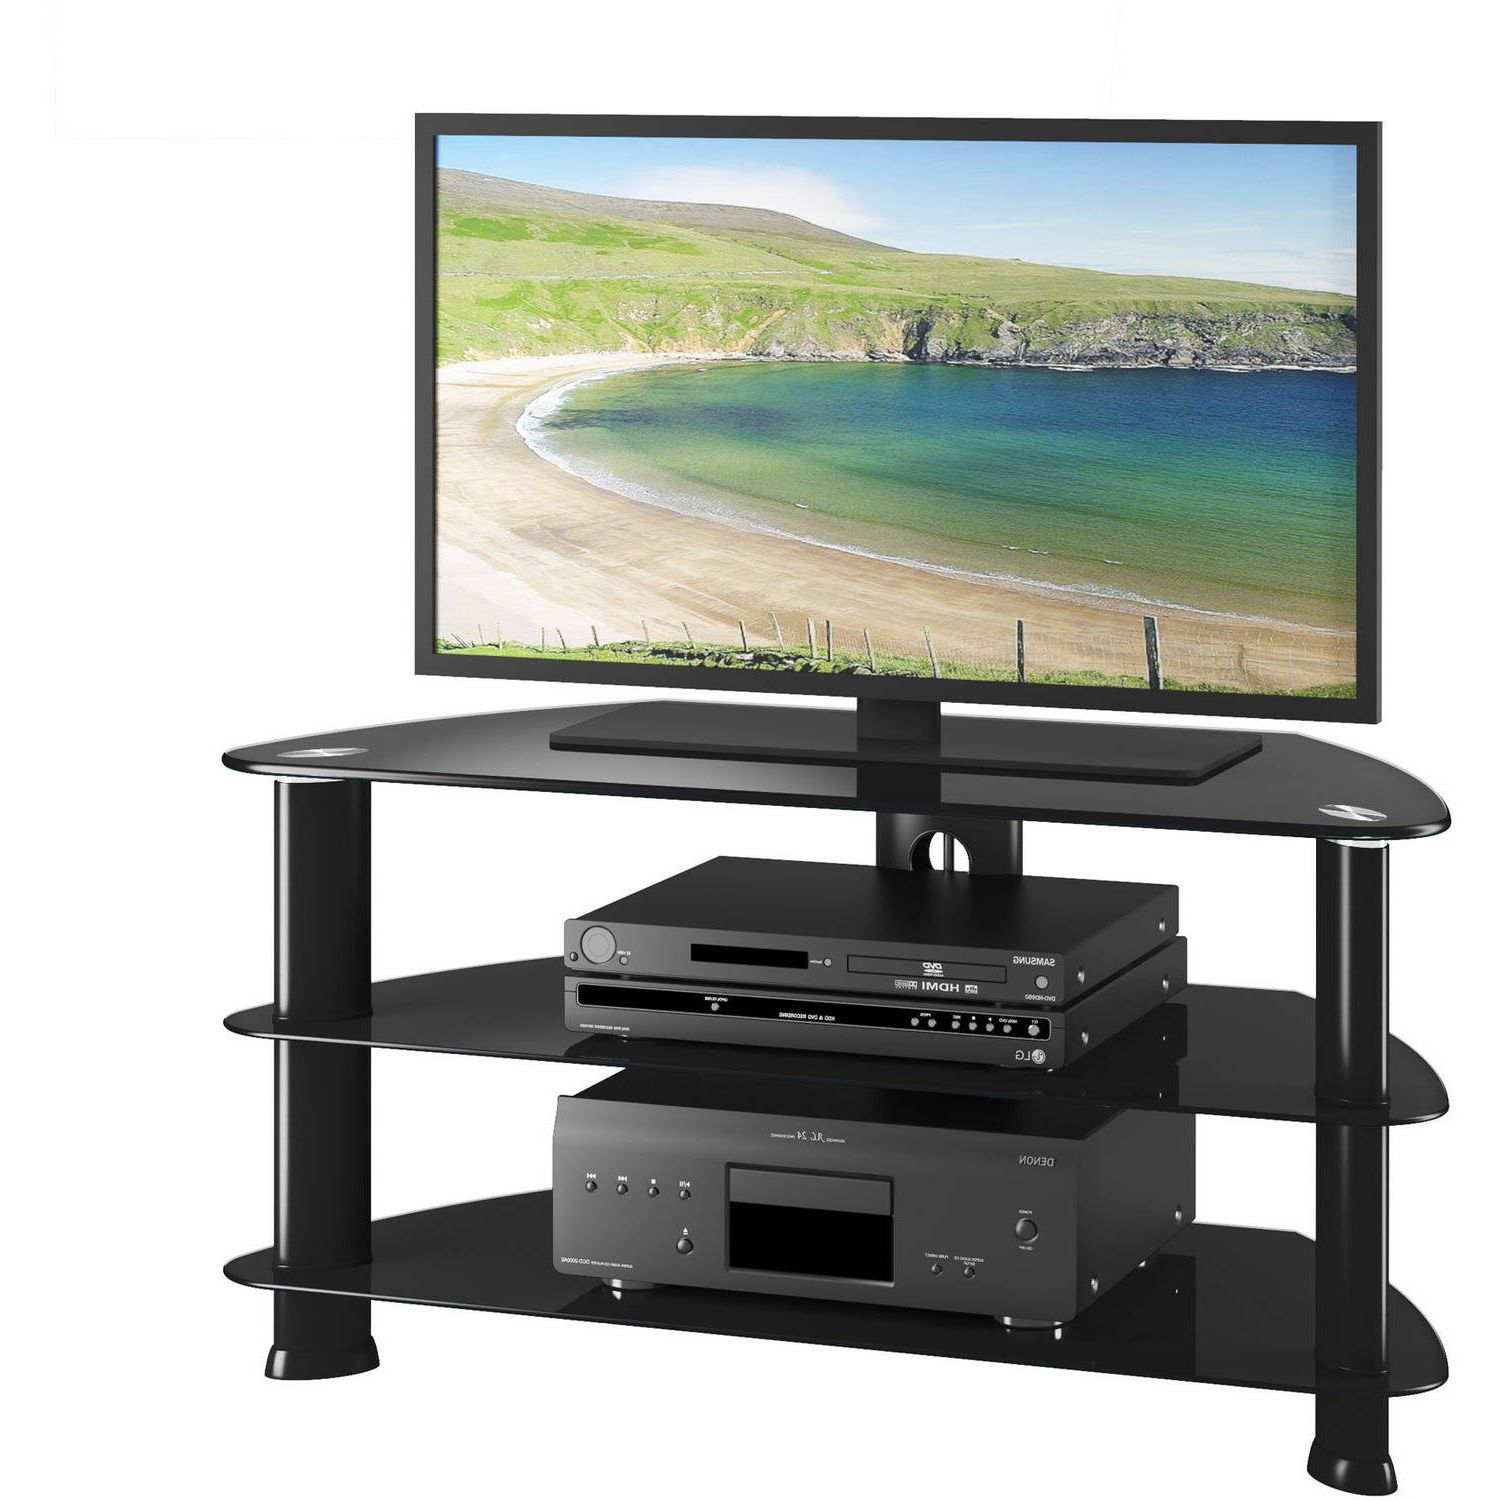 Laguna Satin Black Corner Tv Stand For Tvs Up To 50 With Tv Stands For Tvs Up To 50" (Gallery 13 of 20)